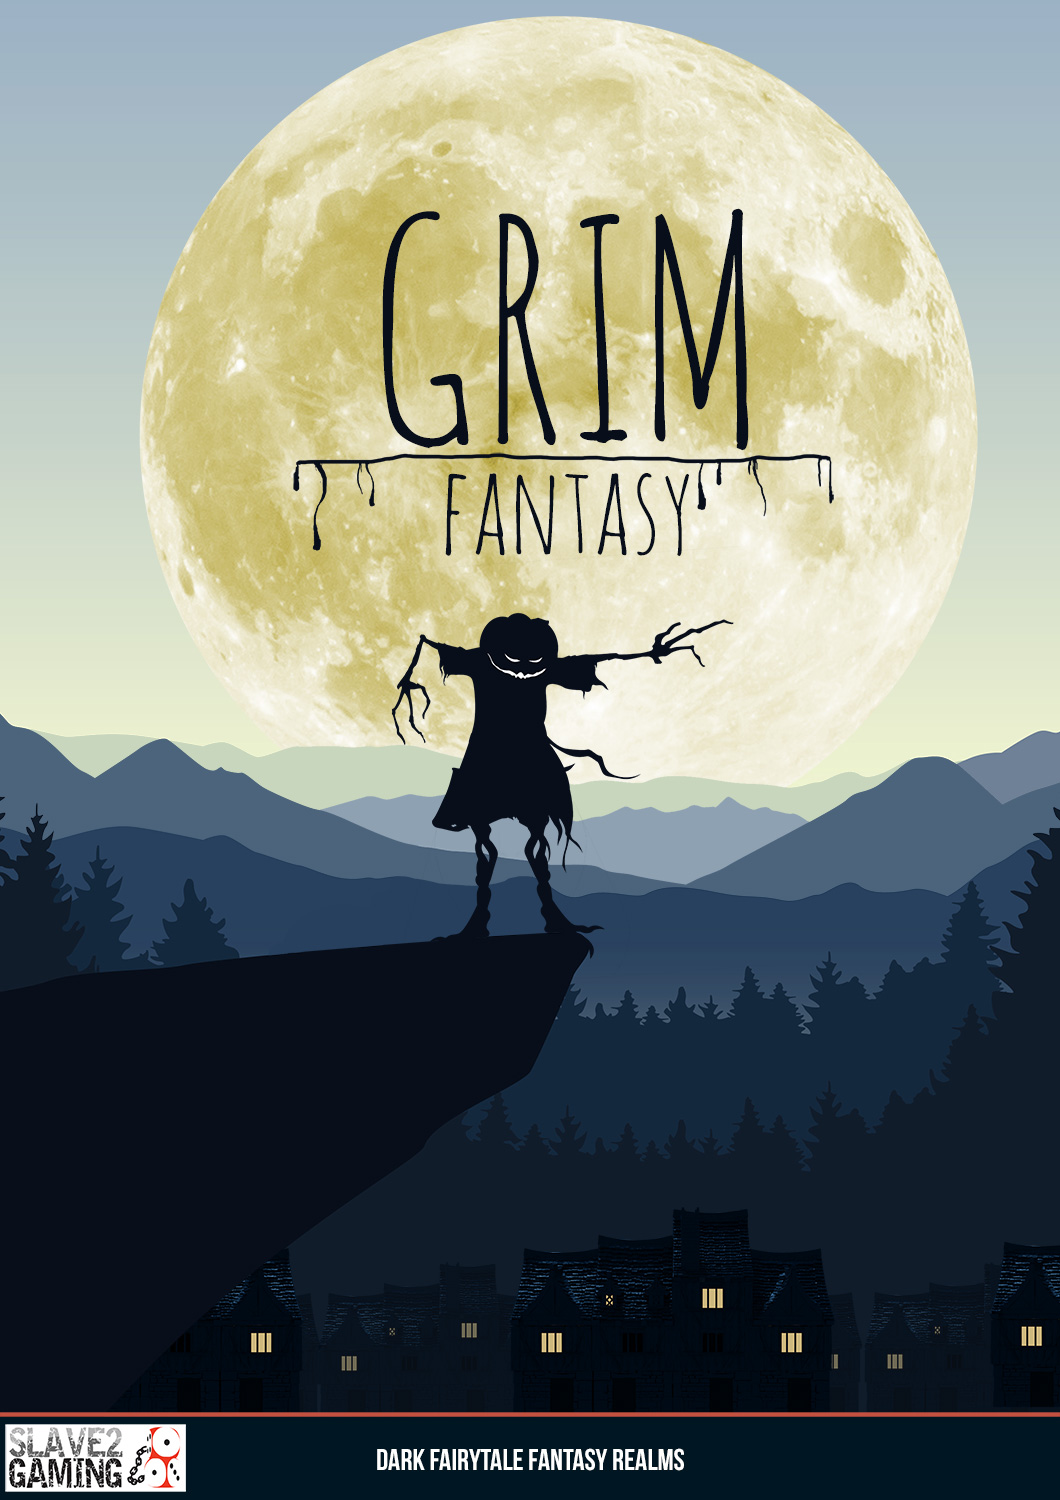 Grim Fantasy World Continues to Grow